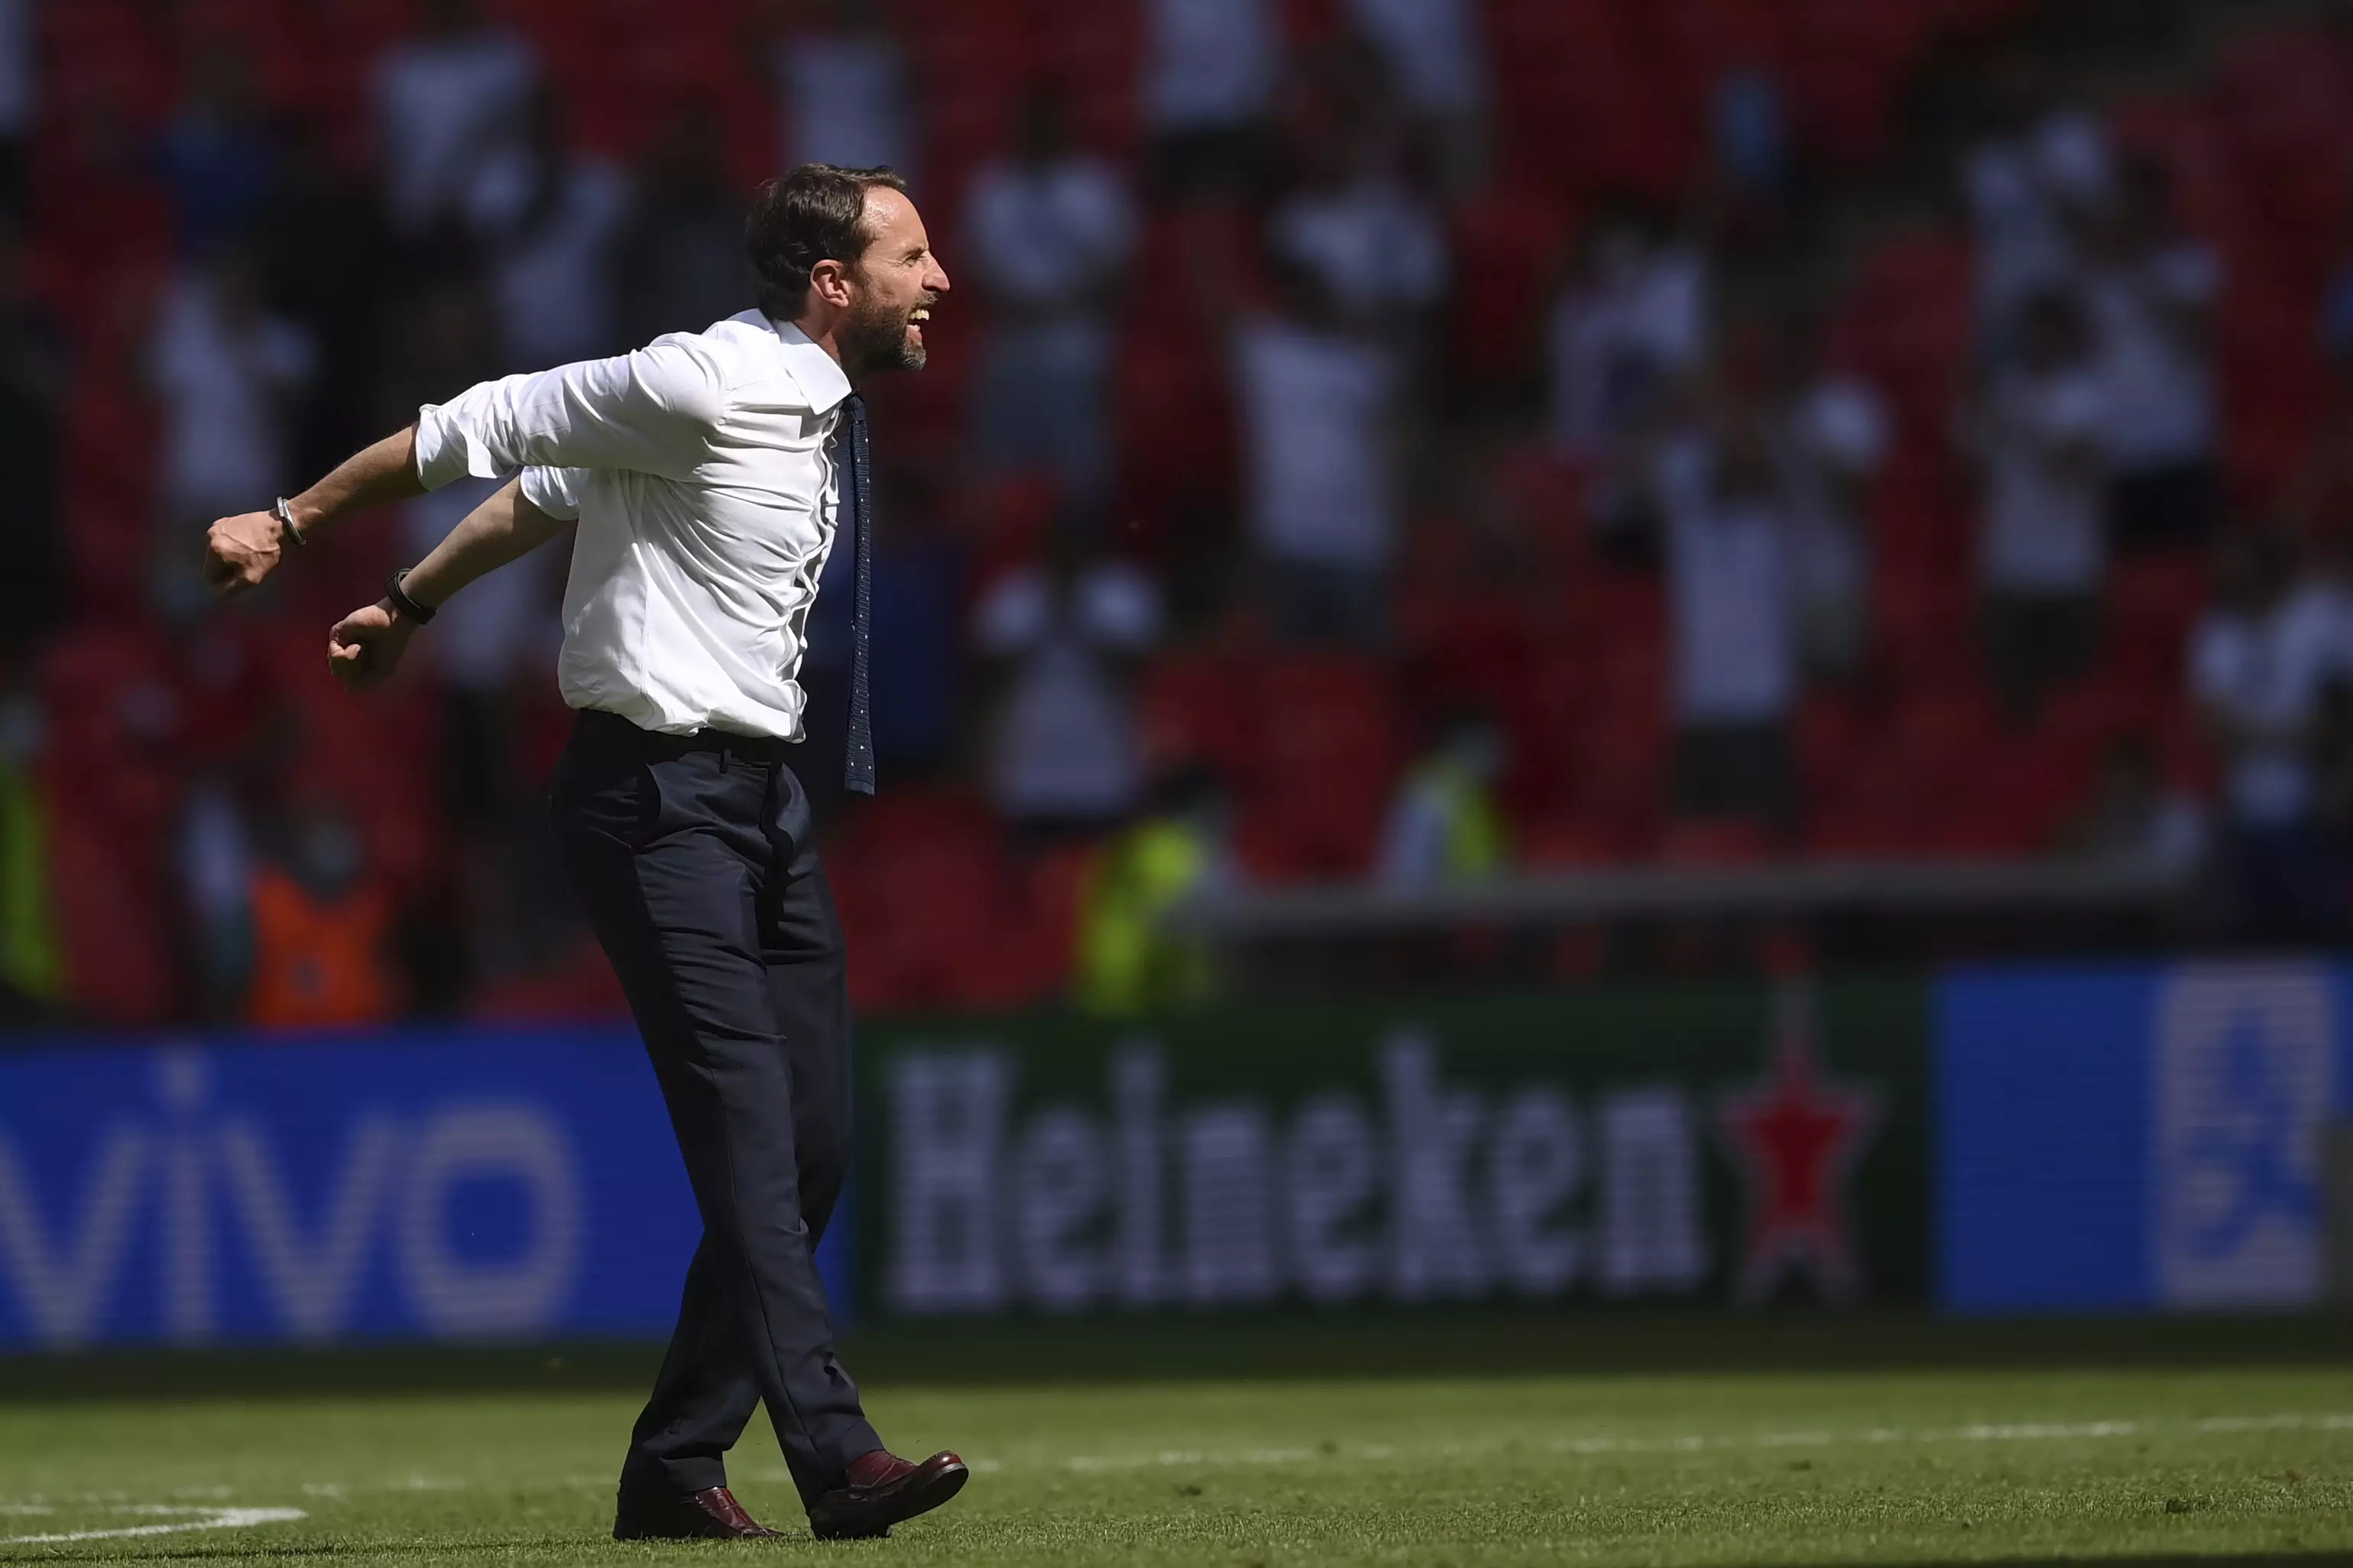 Southgate celebrates with the fans after the win. Image: PA Images